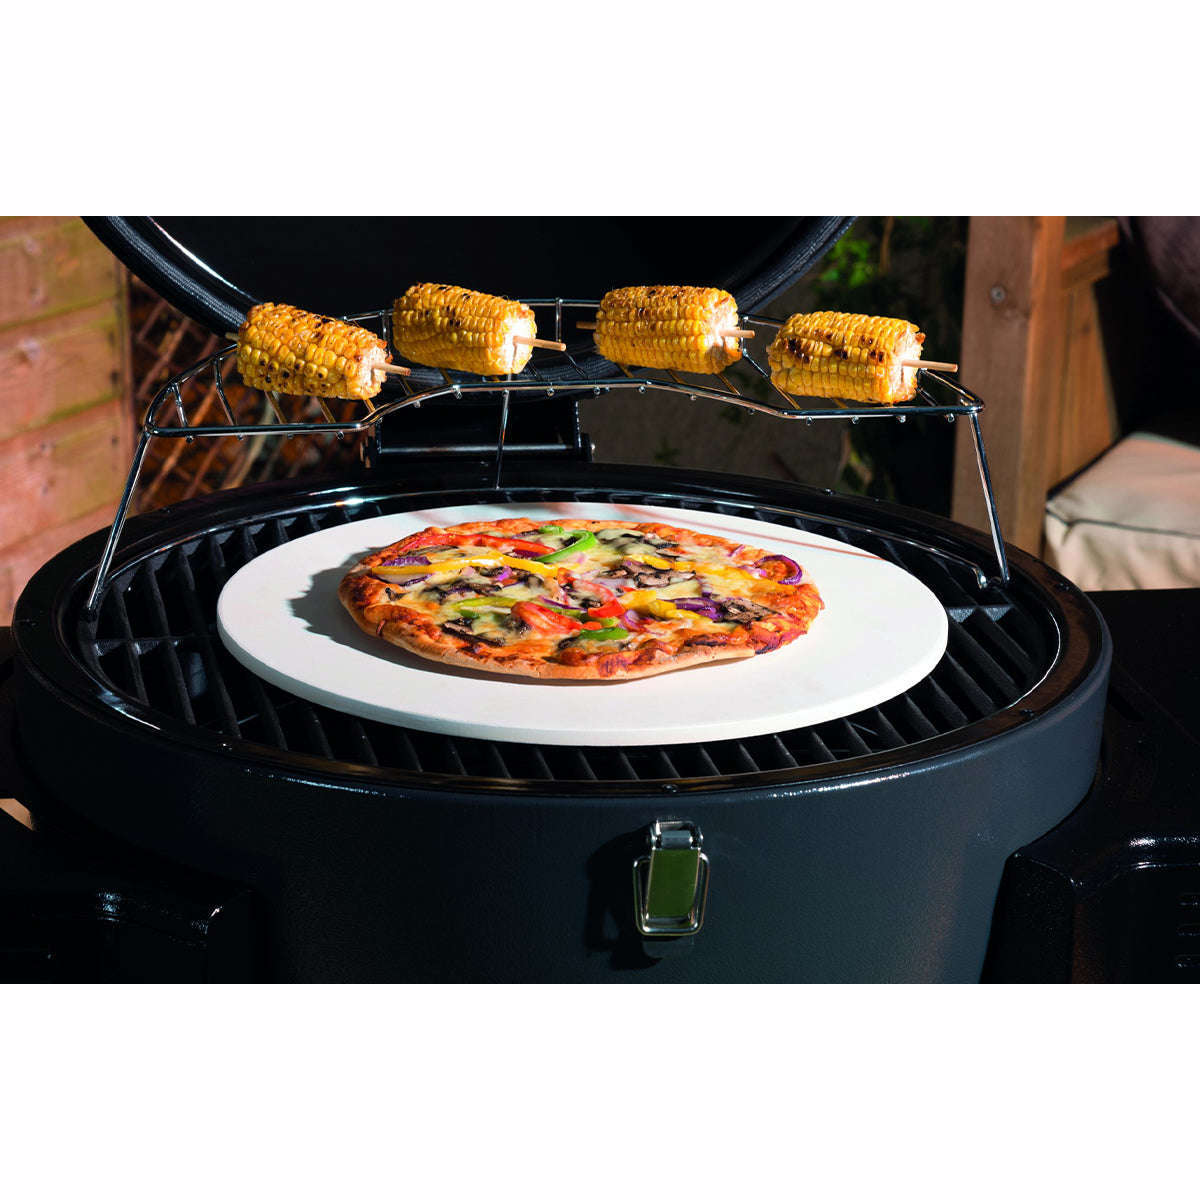 Exceptional Garden:Lifestyle Dragon Egg Charcoal Barbeques